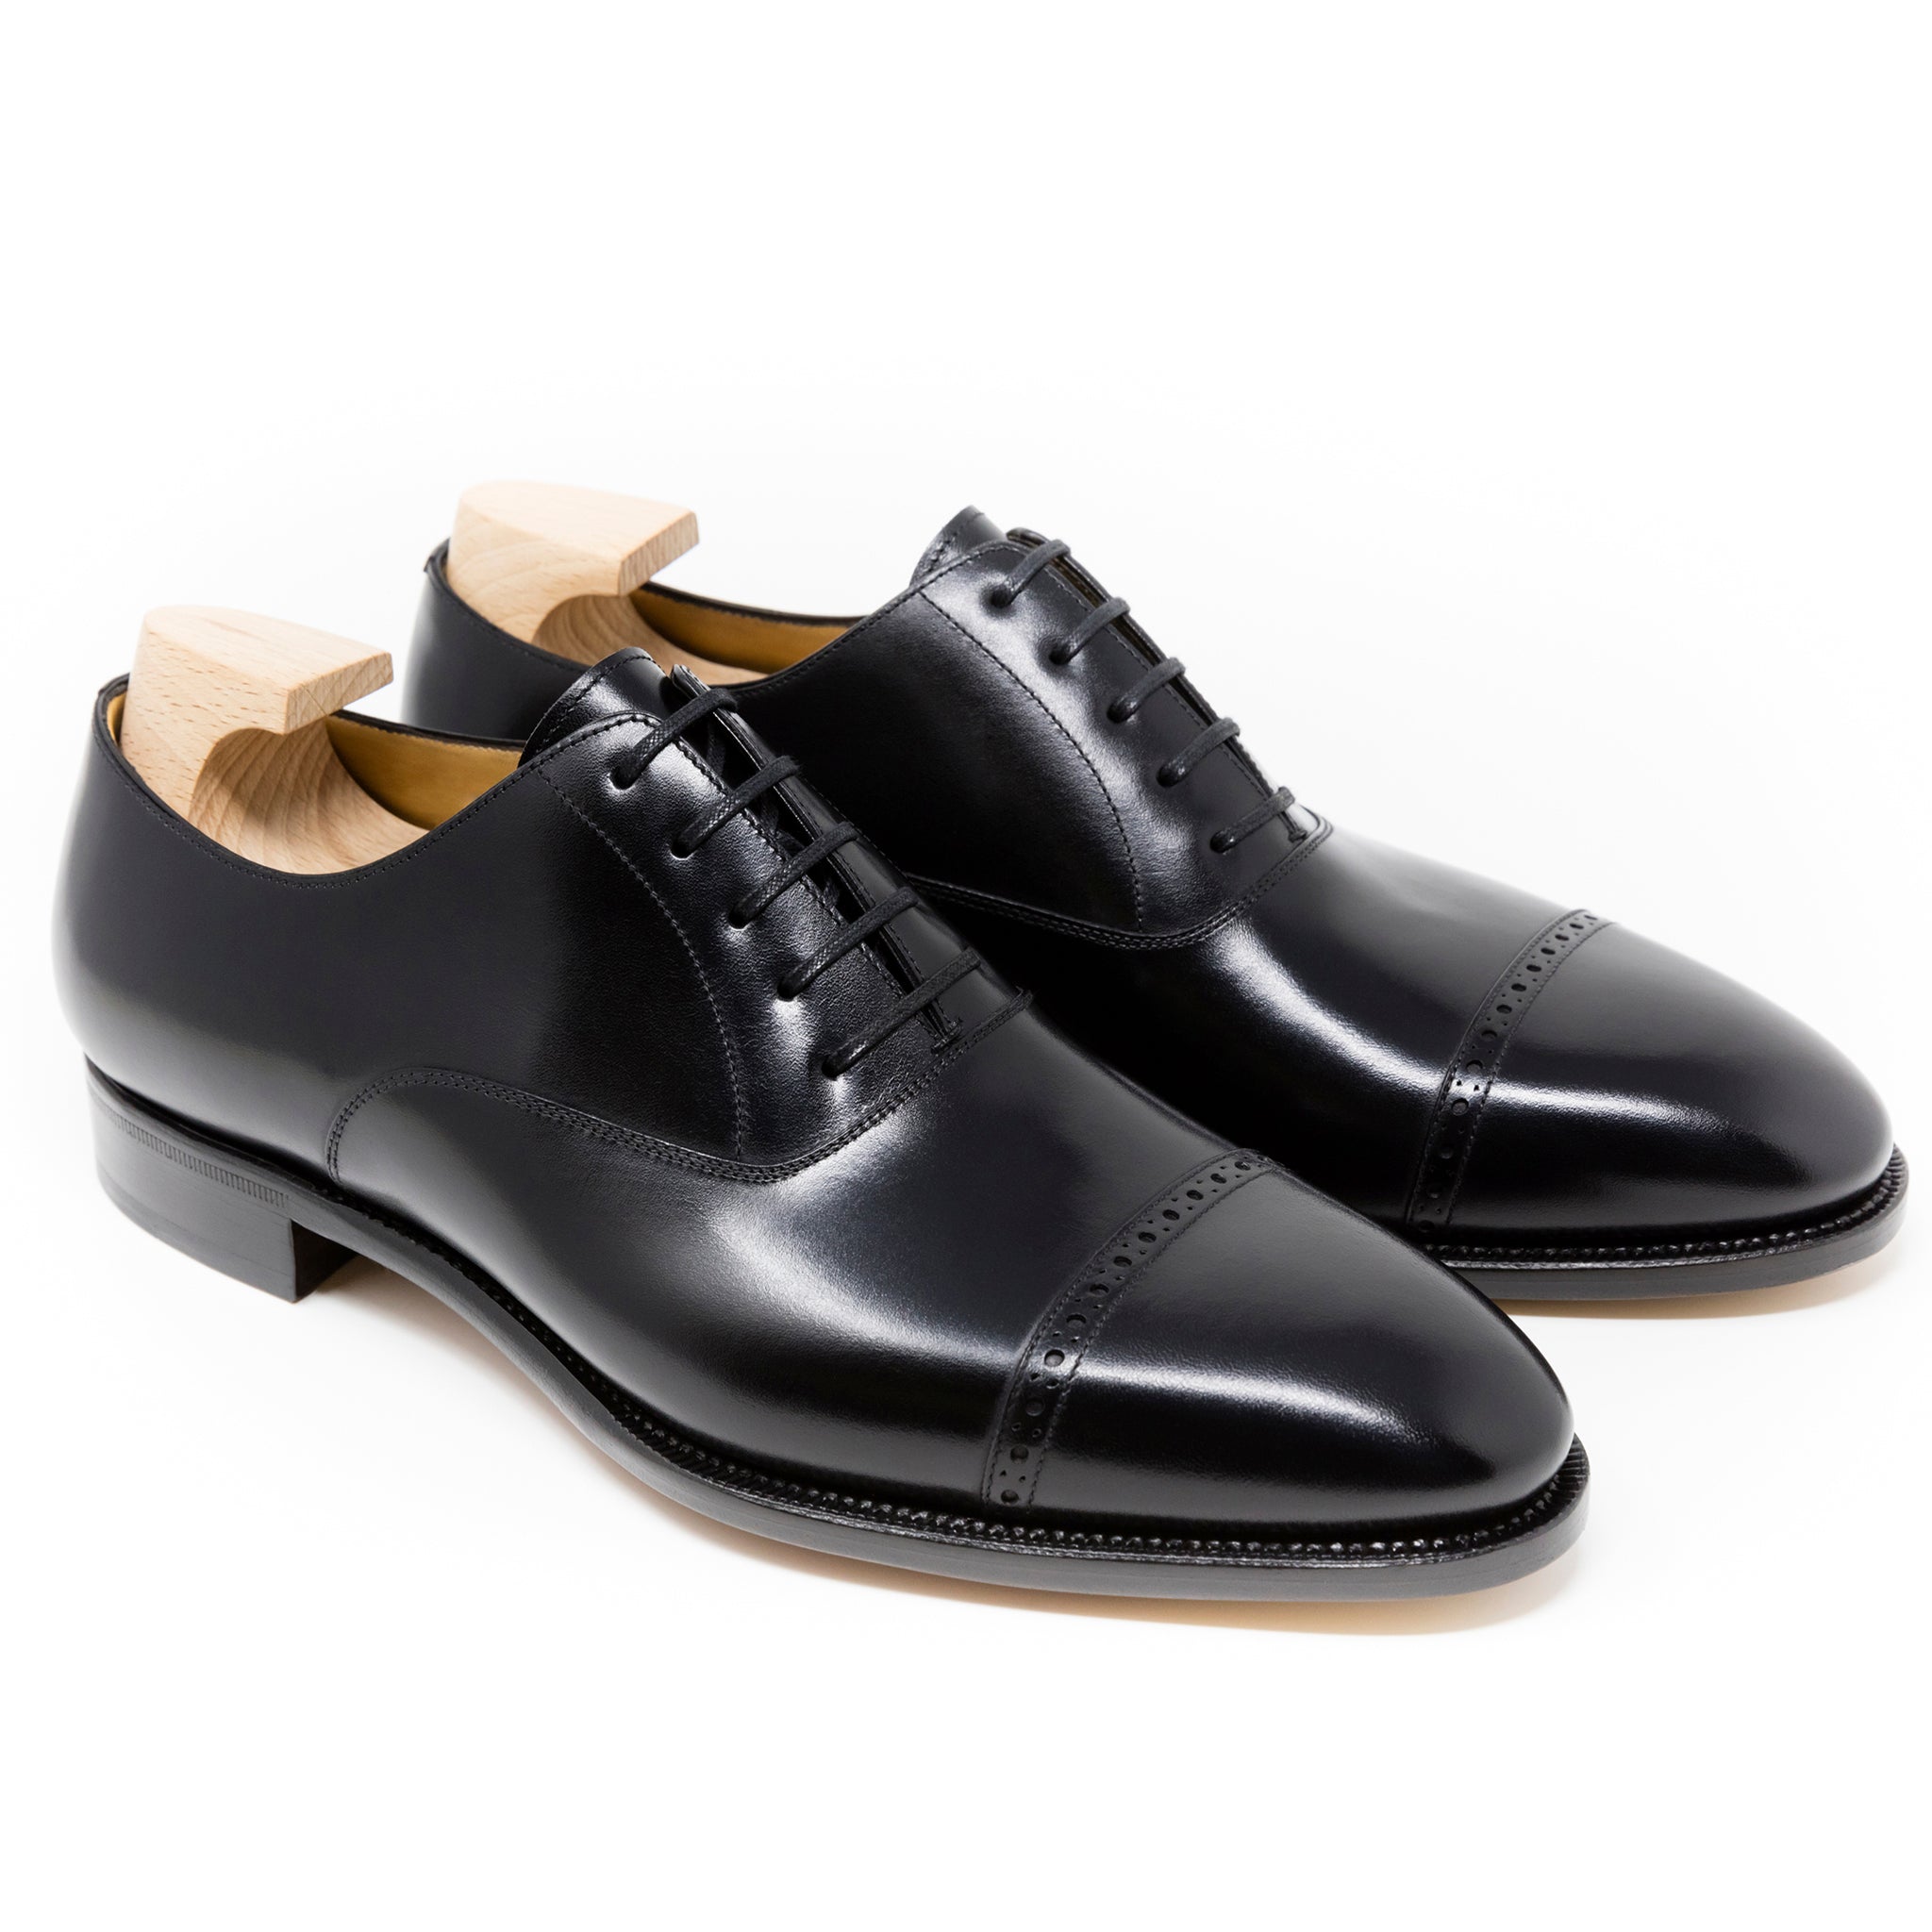 TLB Mallorca | Men's leather shoes | Oxford Shoes Artista Collection ...